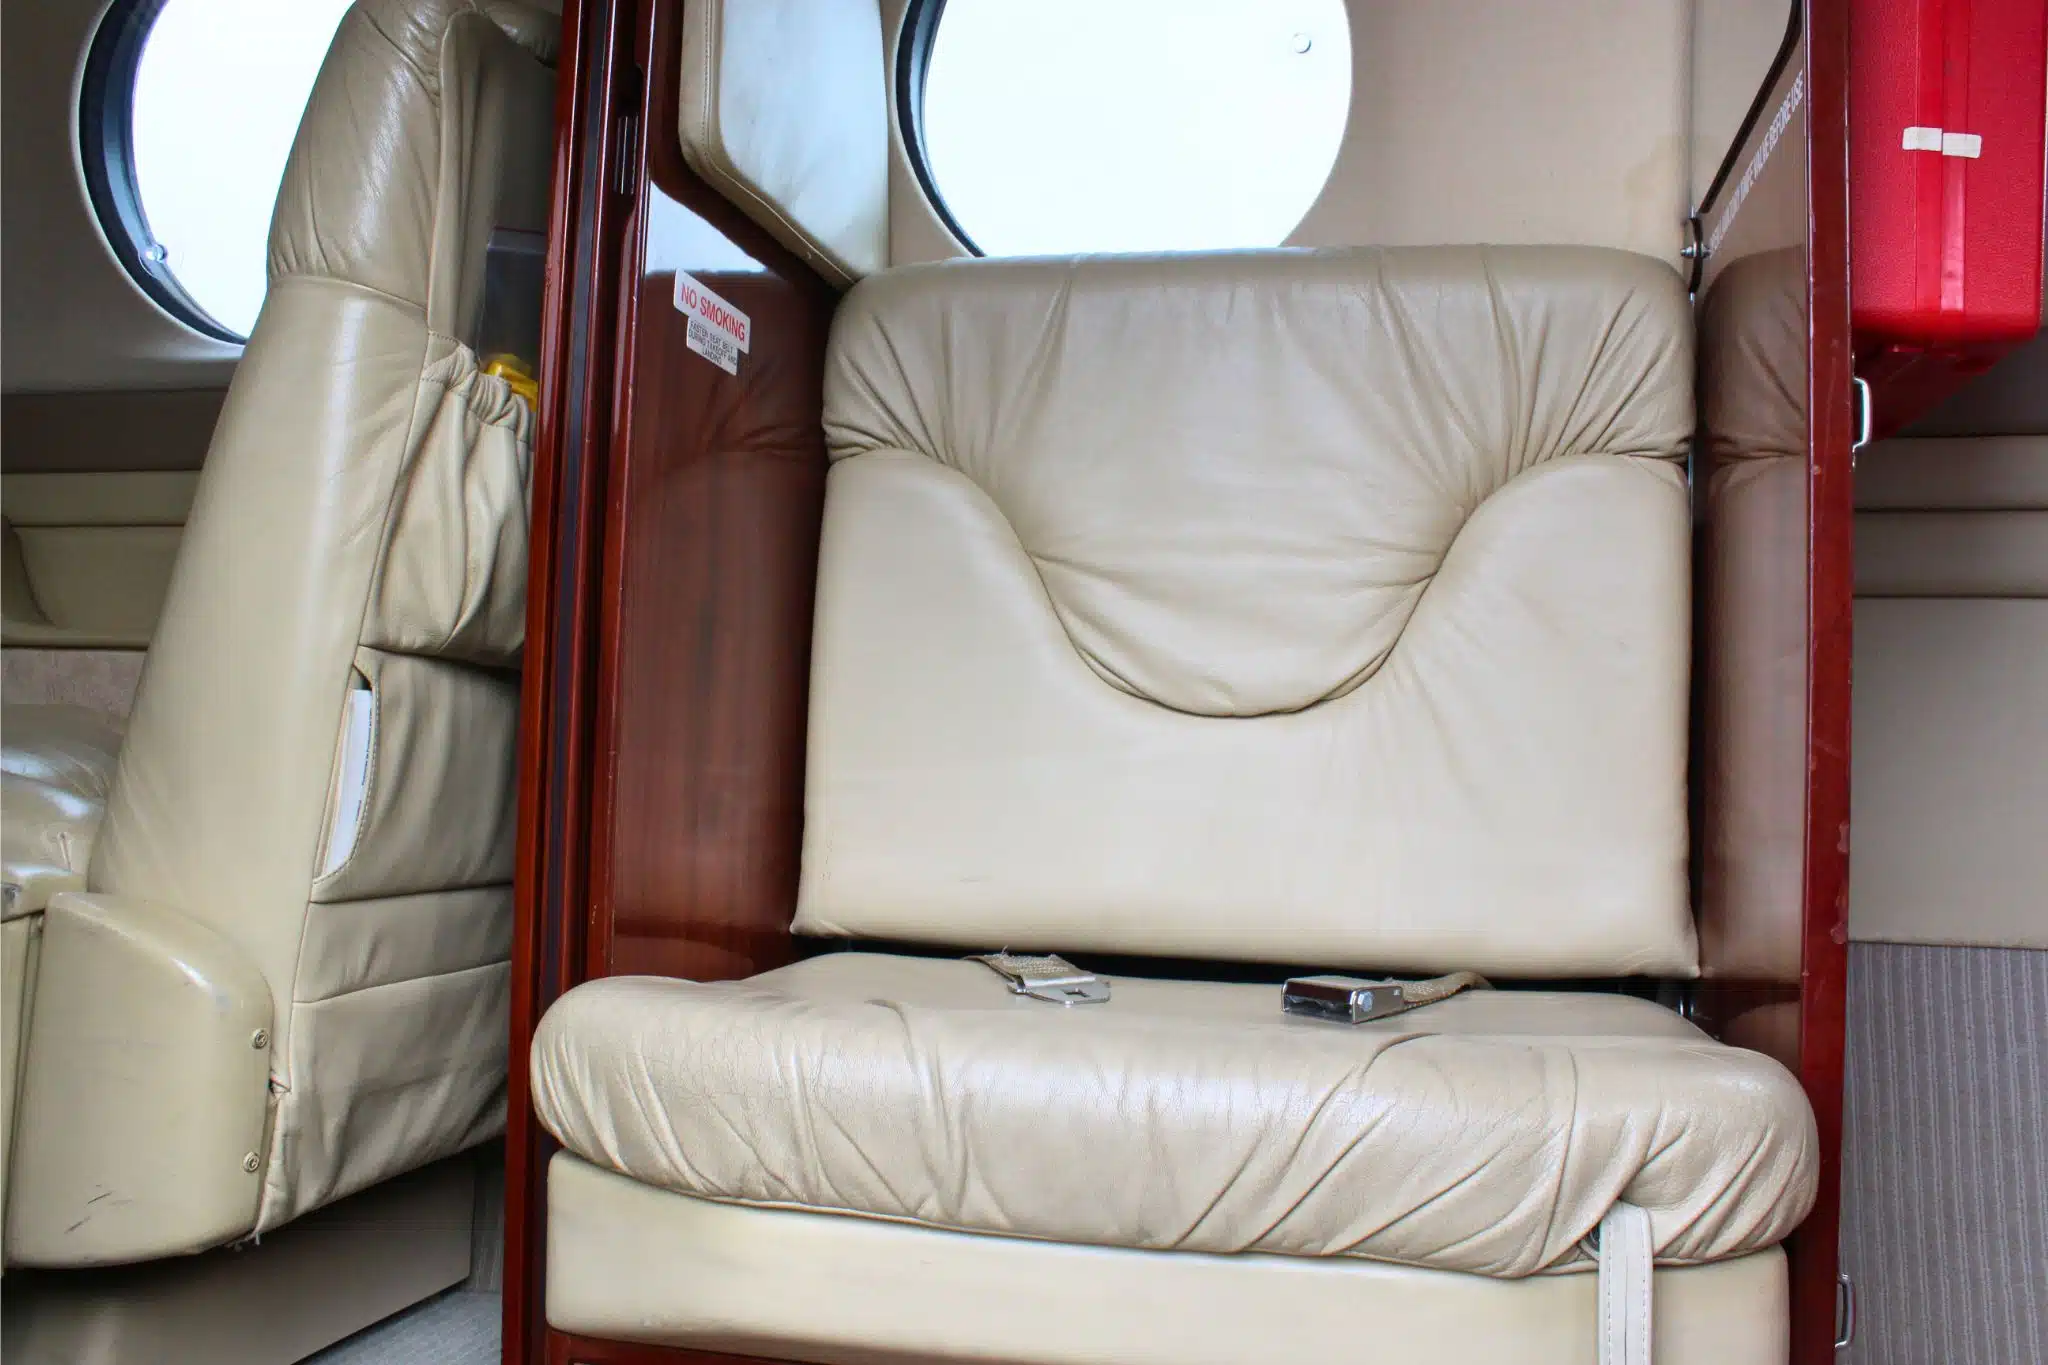 Private jet cabin features, the belted toilet